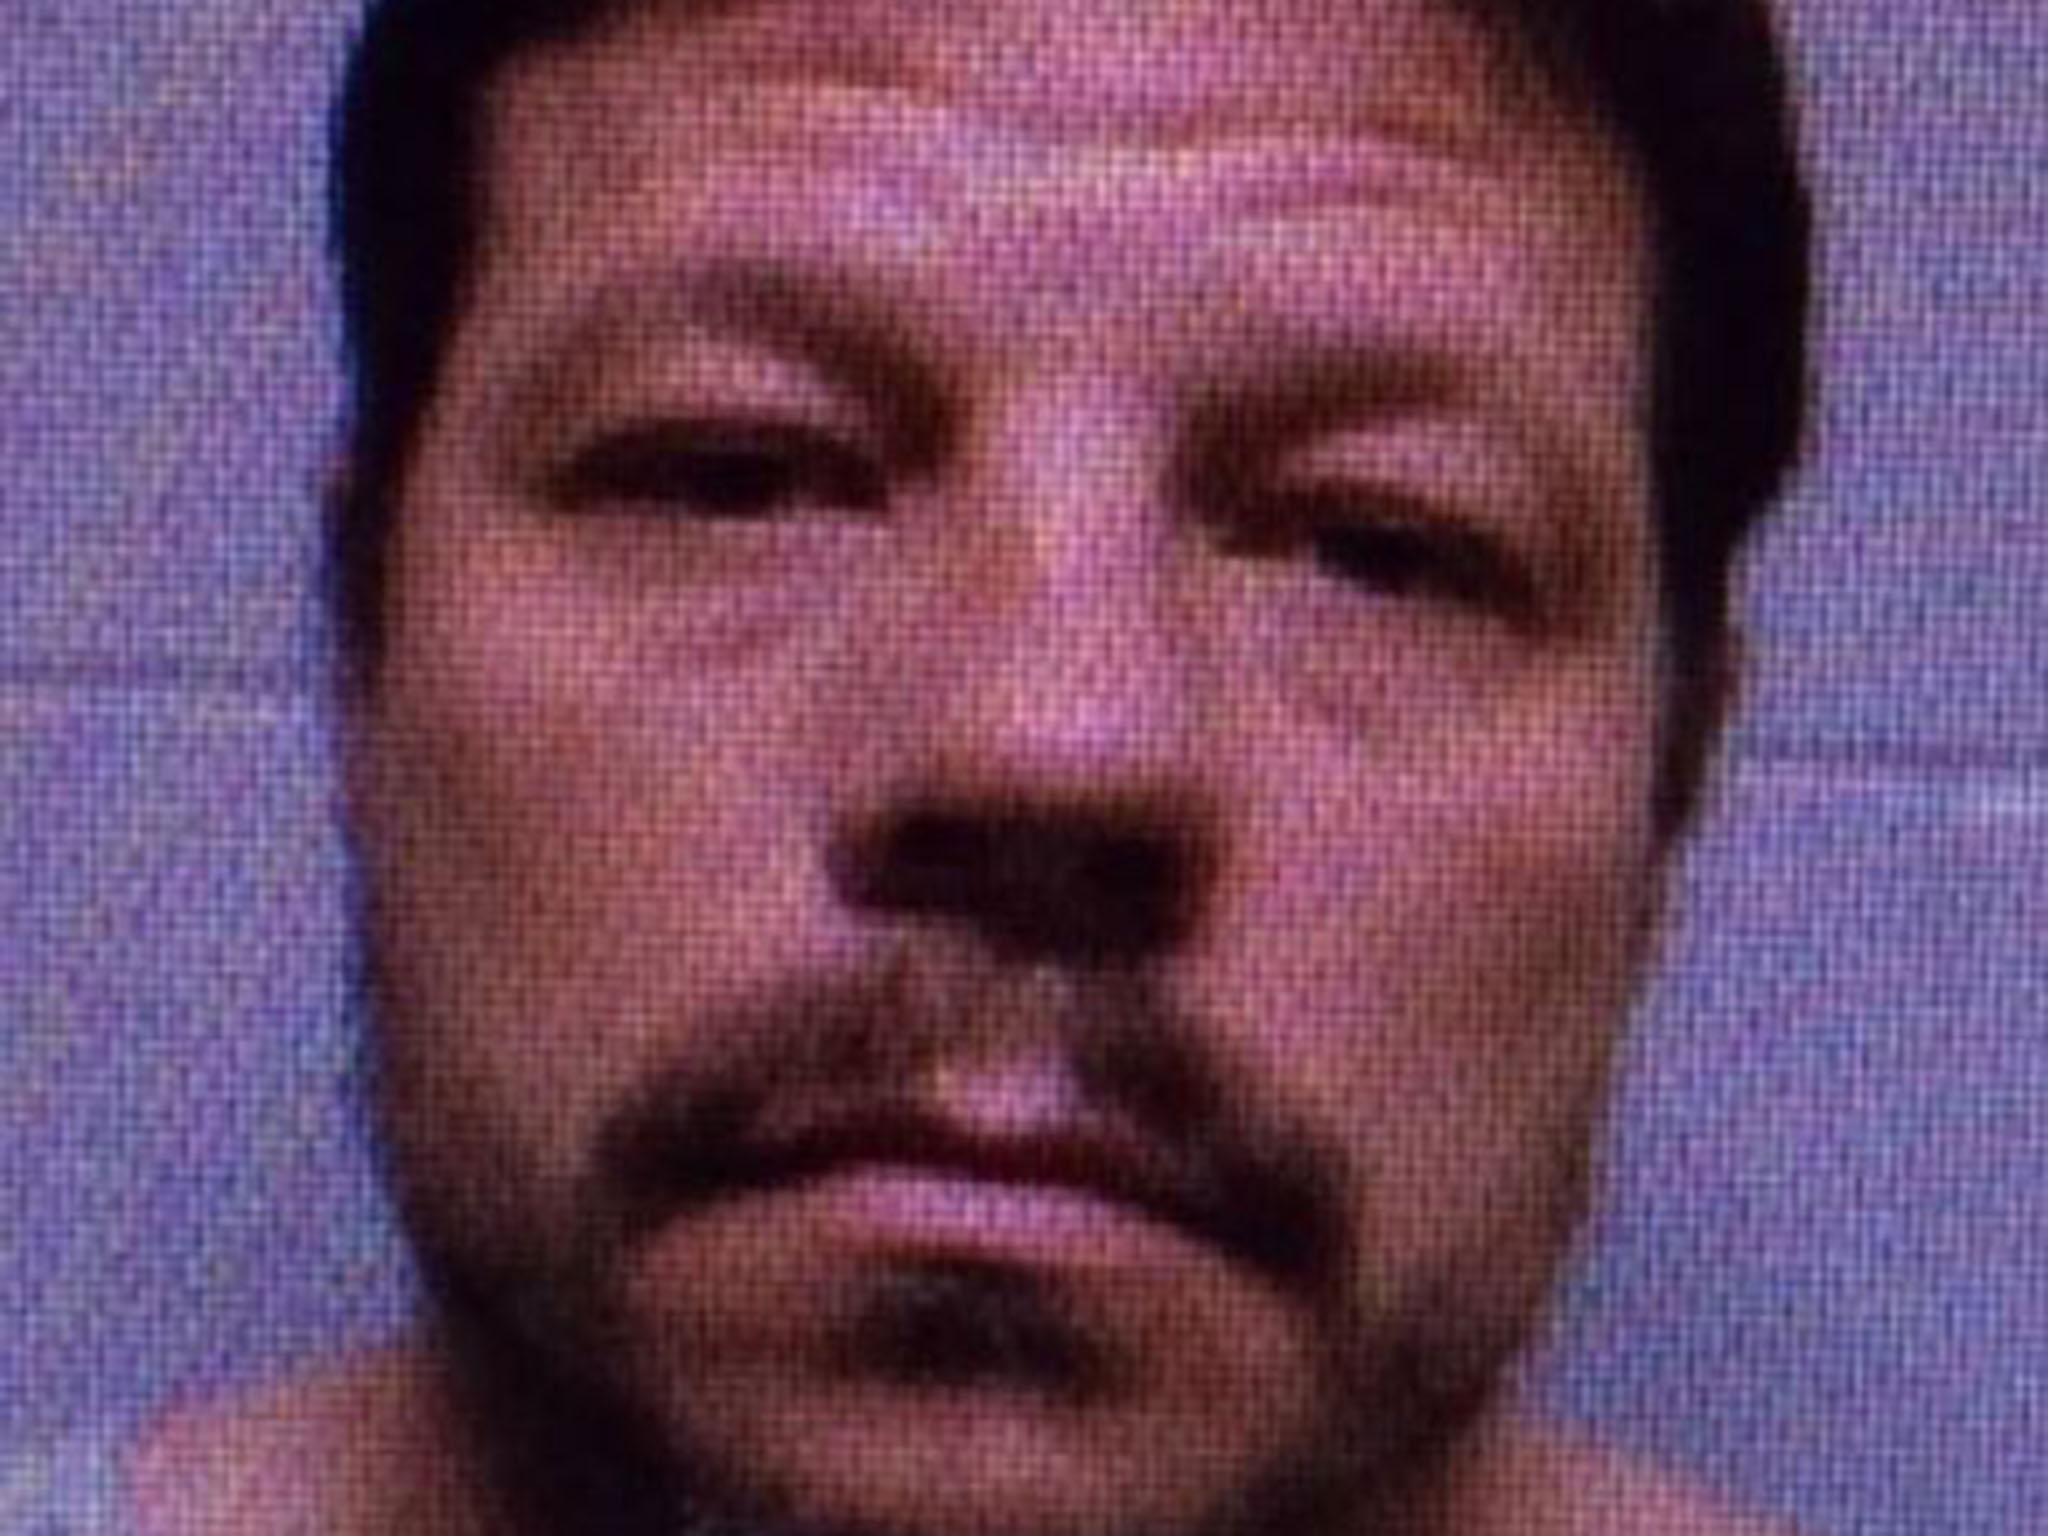 Michael Vance shot at officers before stealing a patrol car and fleeing the scene